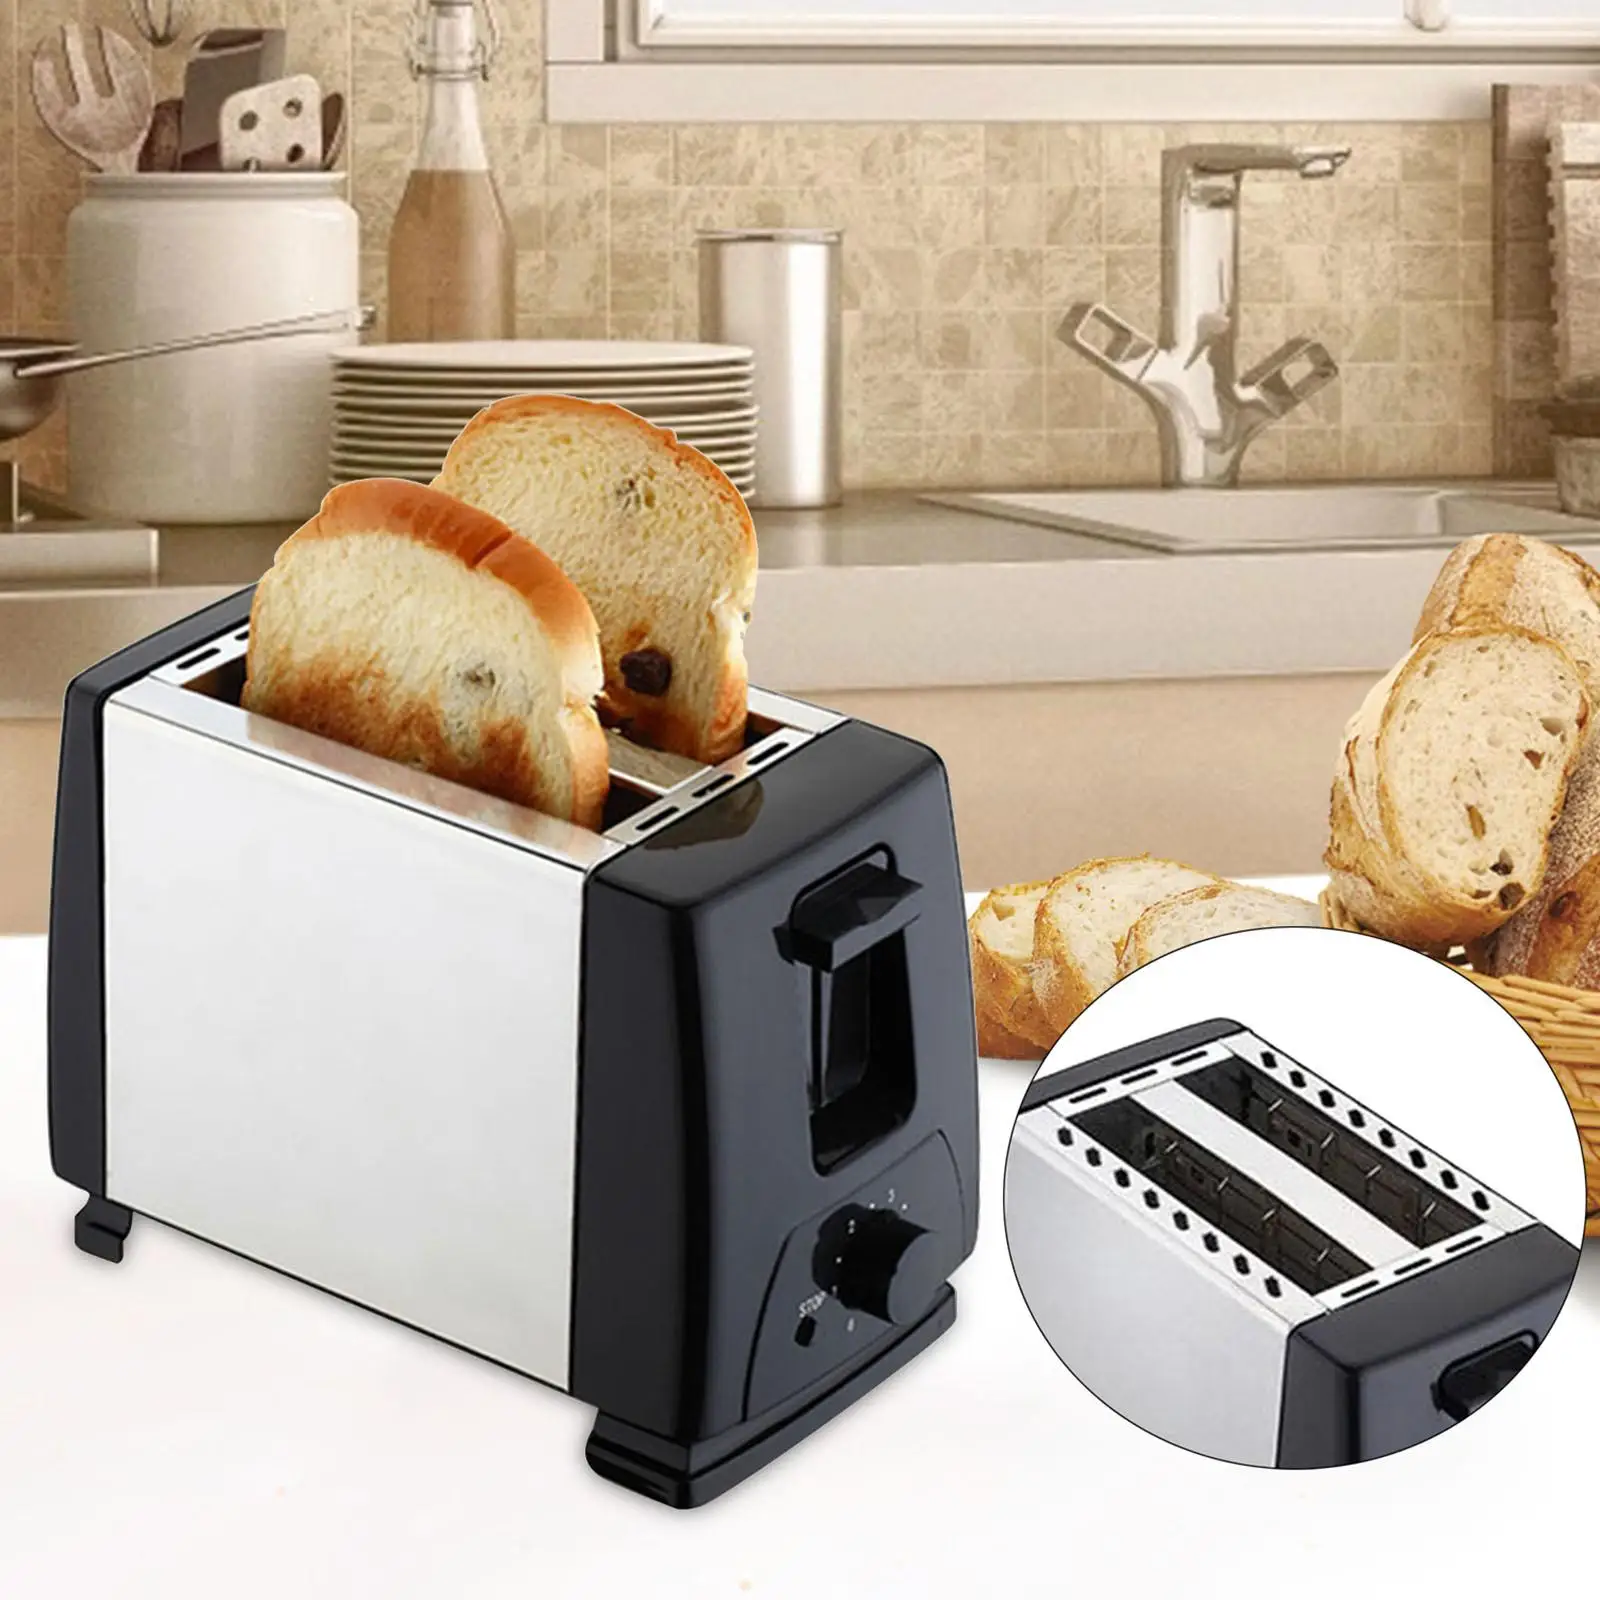 Household Automatic Baking Bread Maker 750W Breakfast Machine Stainless Steel Electric Toaster for Sandwich Cooking Toast Baking